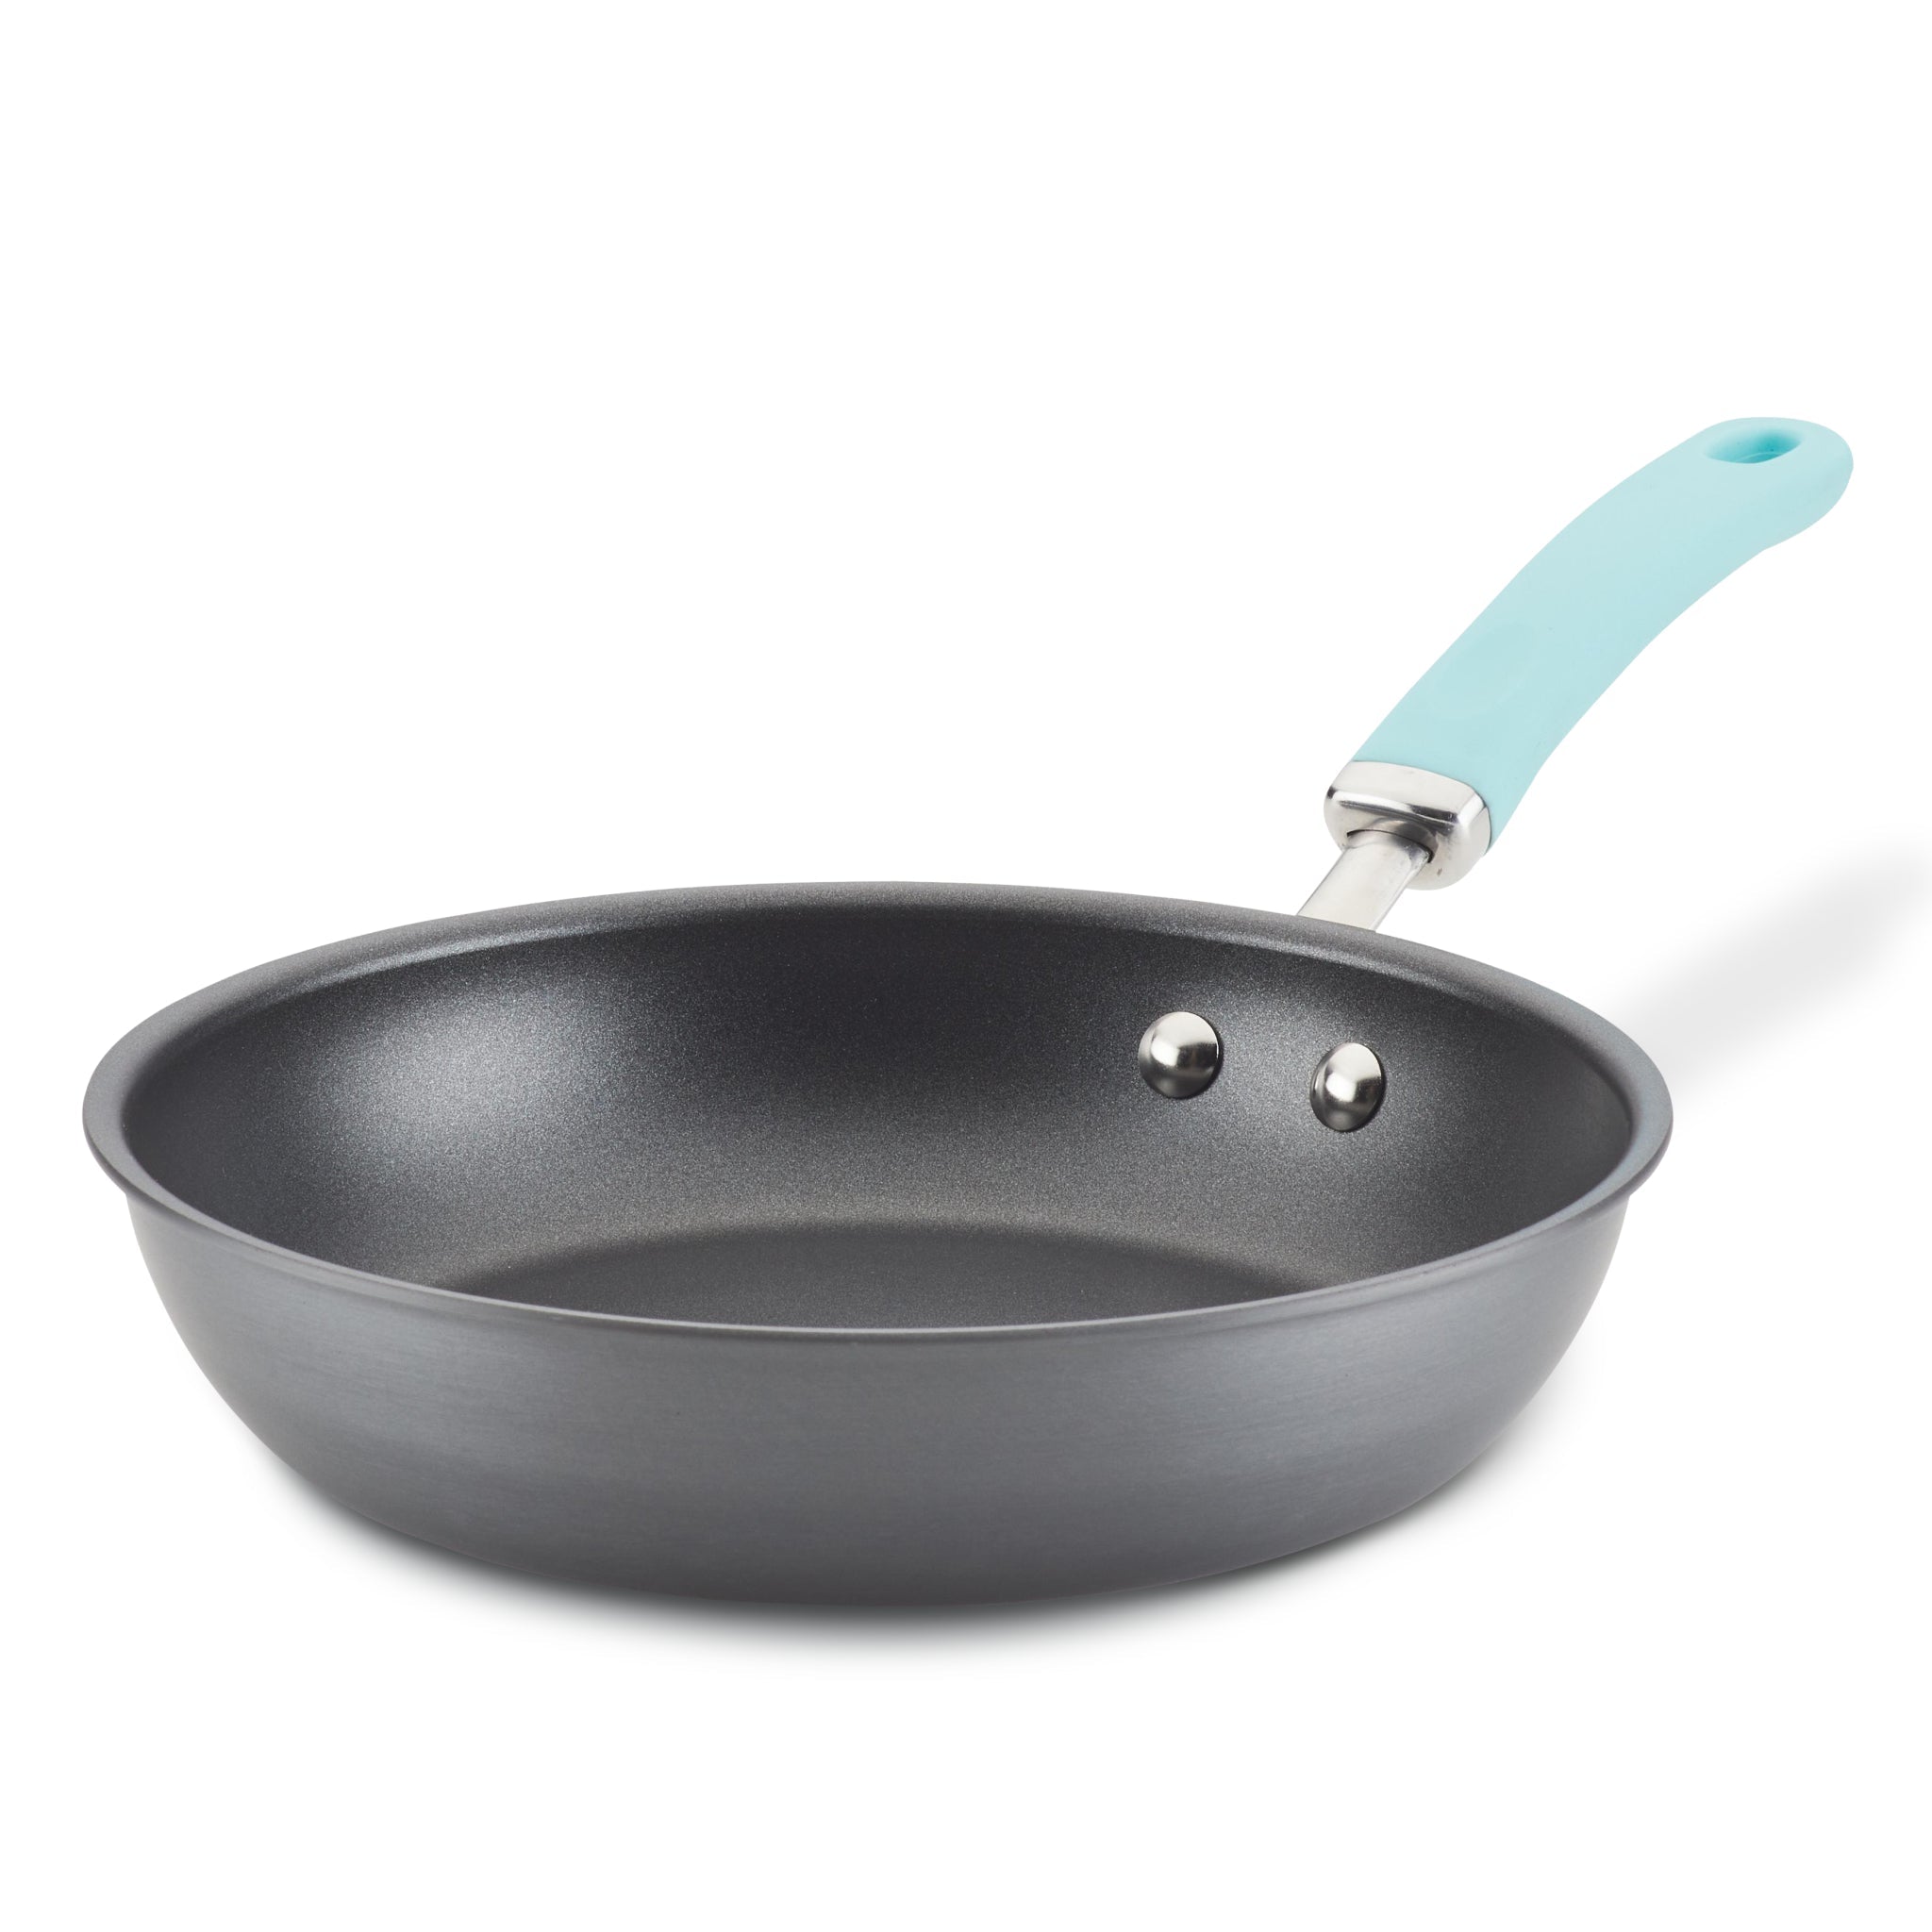 10.25-Inch Hard Anodized Nonstick Induction Deep Frying Pan